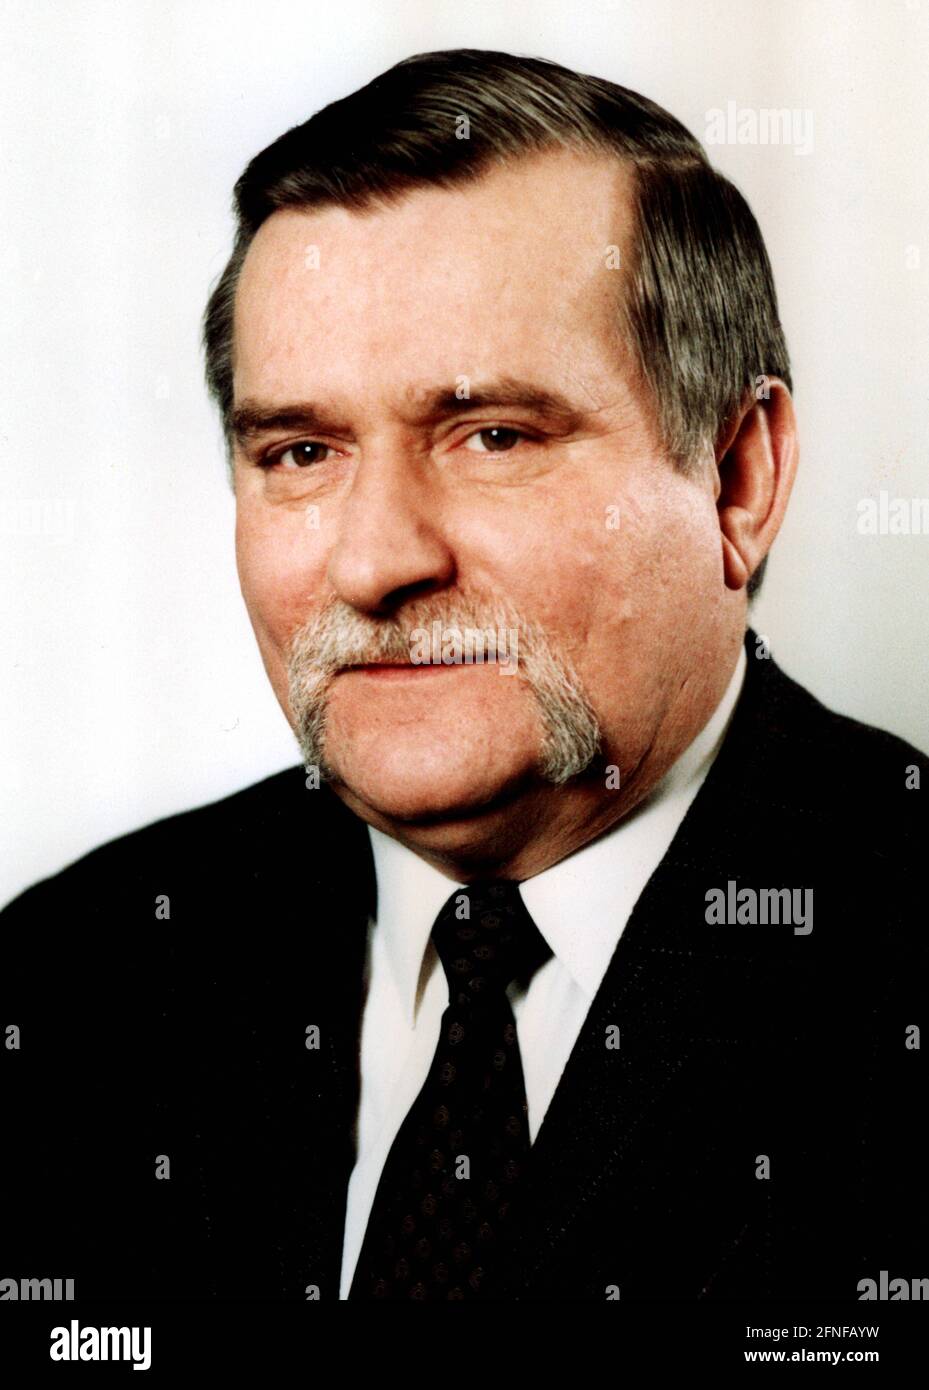 Date of recording: 01.01.1997 - 01.01.1997 Lech Walesa - *29.09.1943 Polish politician, trade unionist, civil rights activist and Nobel Peace Prize winner of the year 1983. 1980 - 1990 Chairman of the trade union Solidarnosc. 1990 - 1995 President of Poland. Photo from 1997 [automated translation] Stock Photo